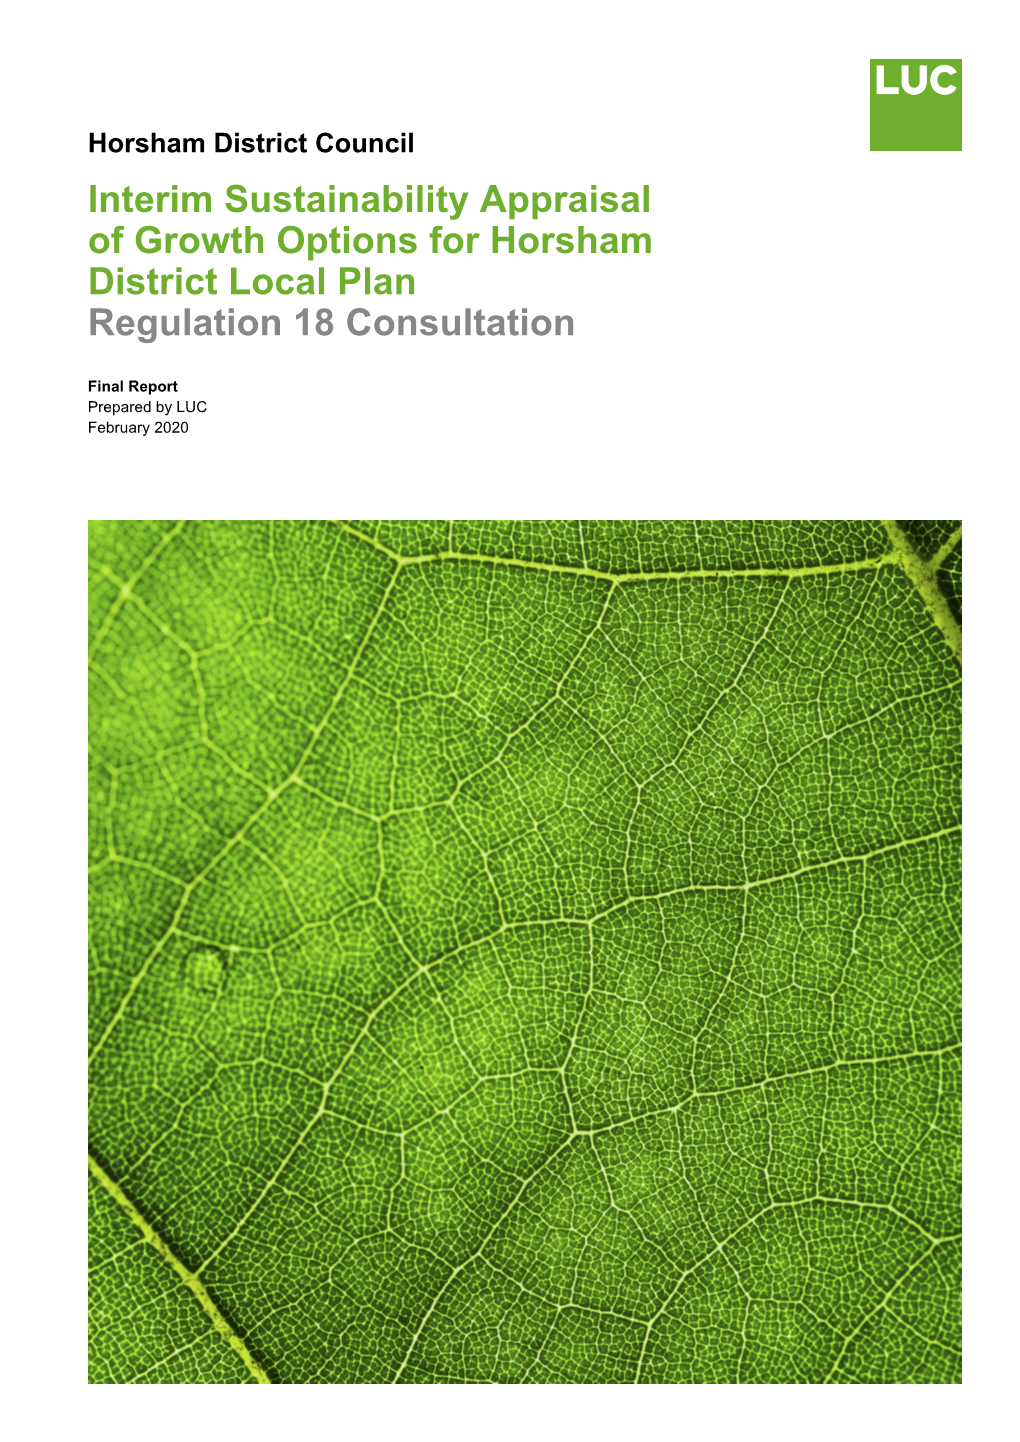 Interim Sustainability Appraisal of Growth Options for Horsham District Local Plan Regulation 18 Consultation